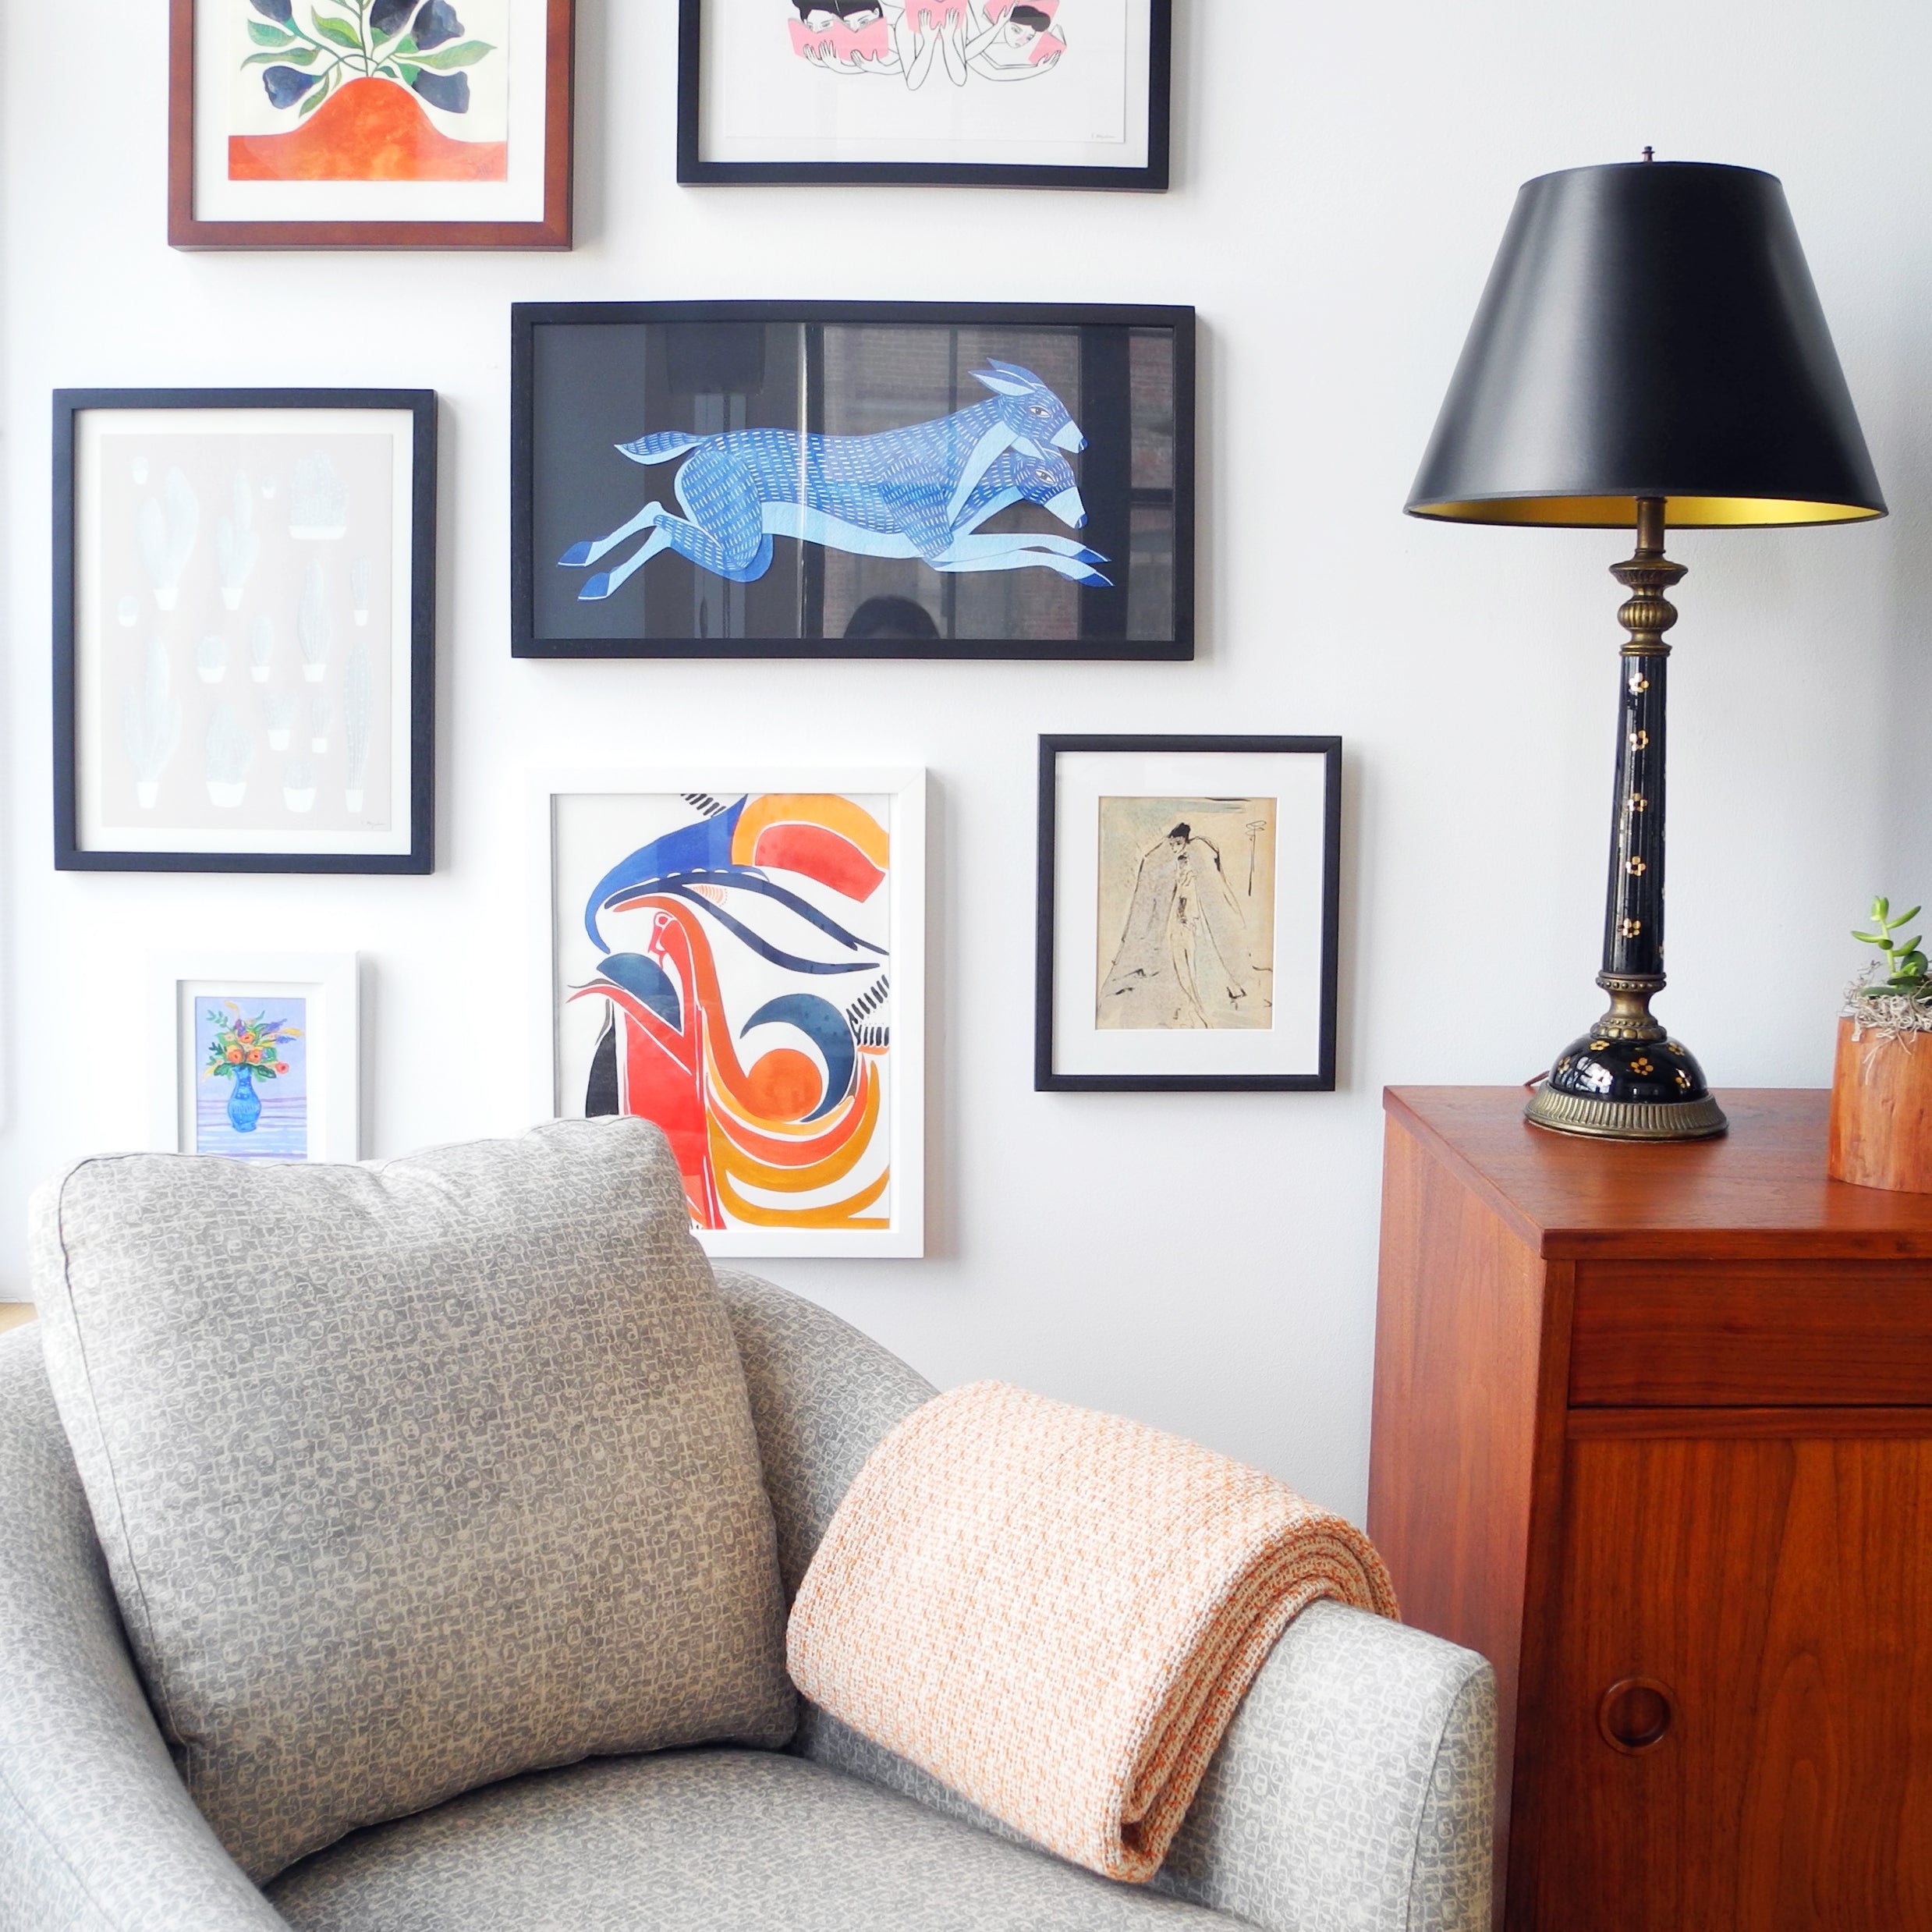 Tips on Building a Gallery Wall